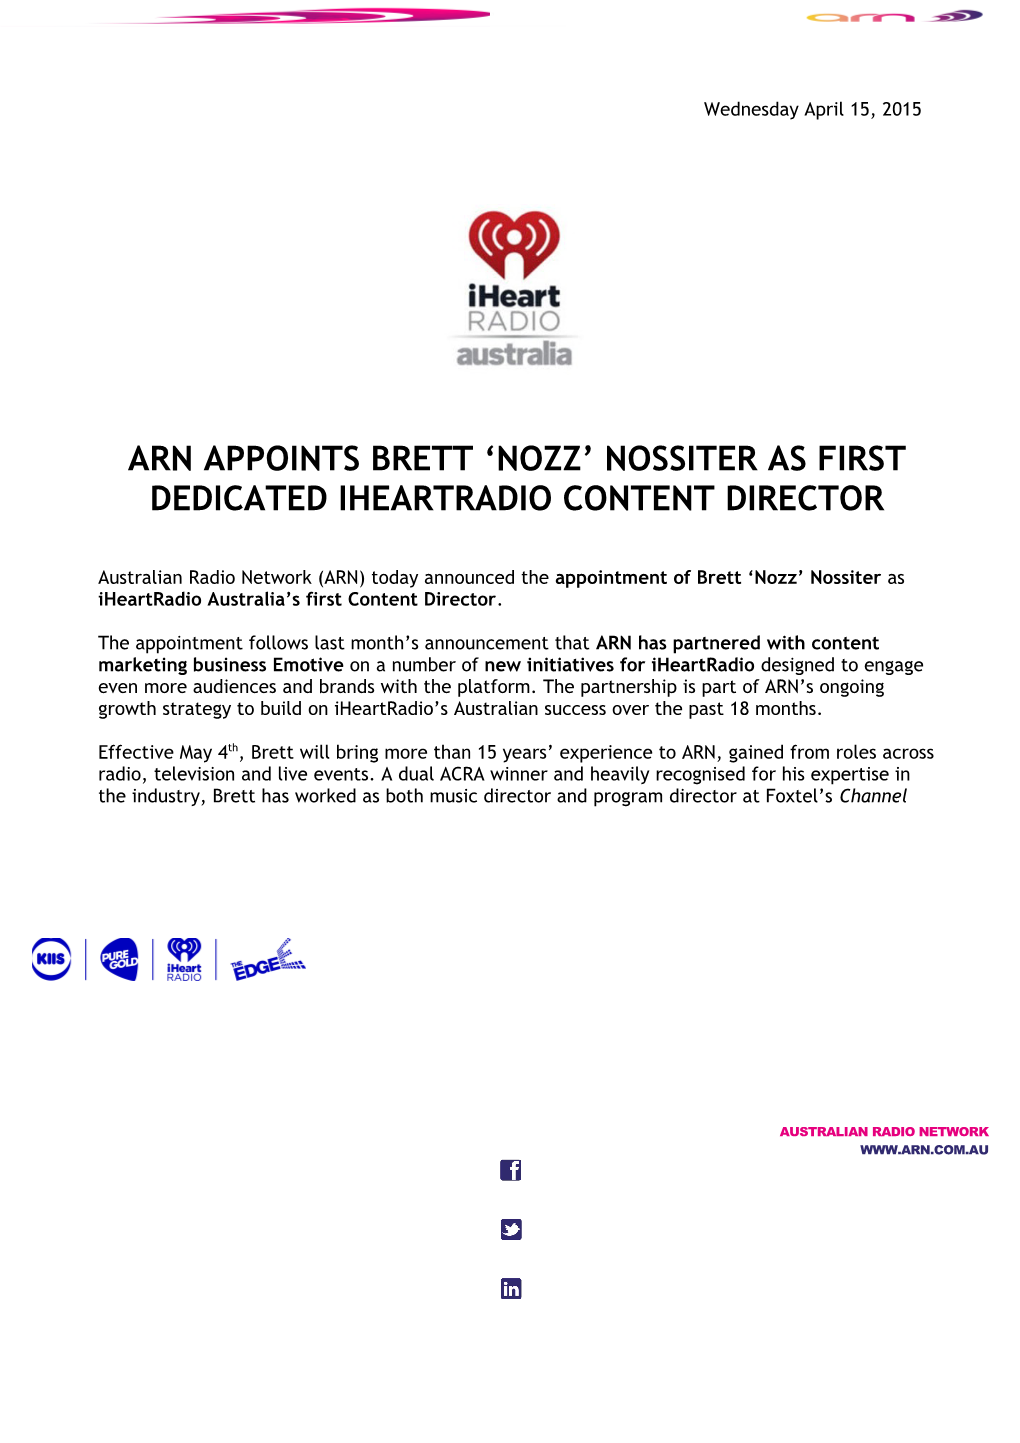 Arn Appoints Brett Nozz Nossiter As First Dedicated Iheartradio Content Director